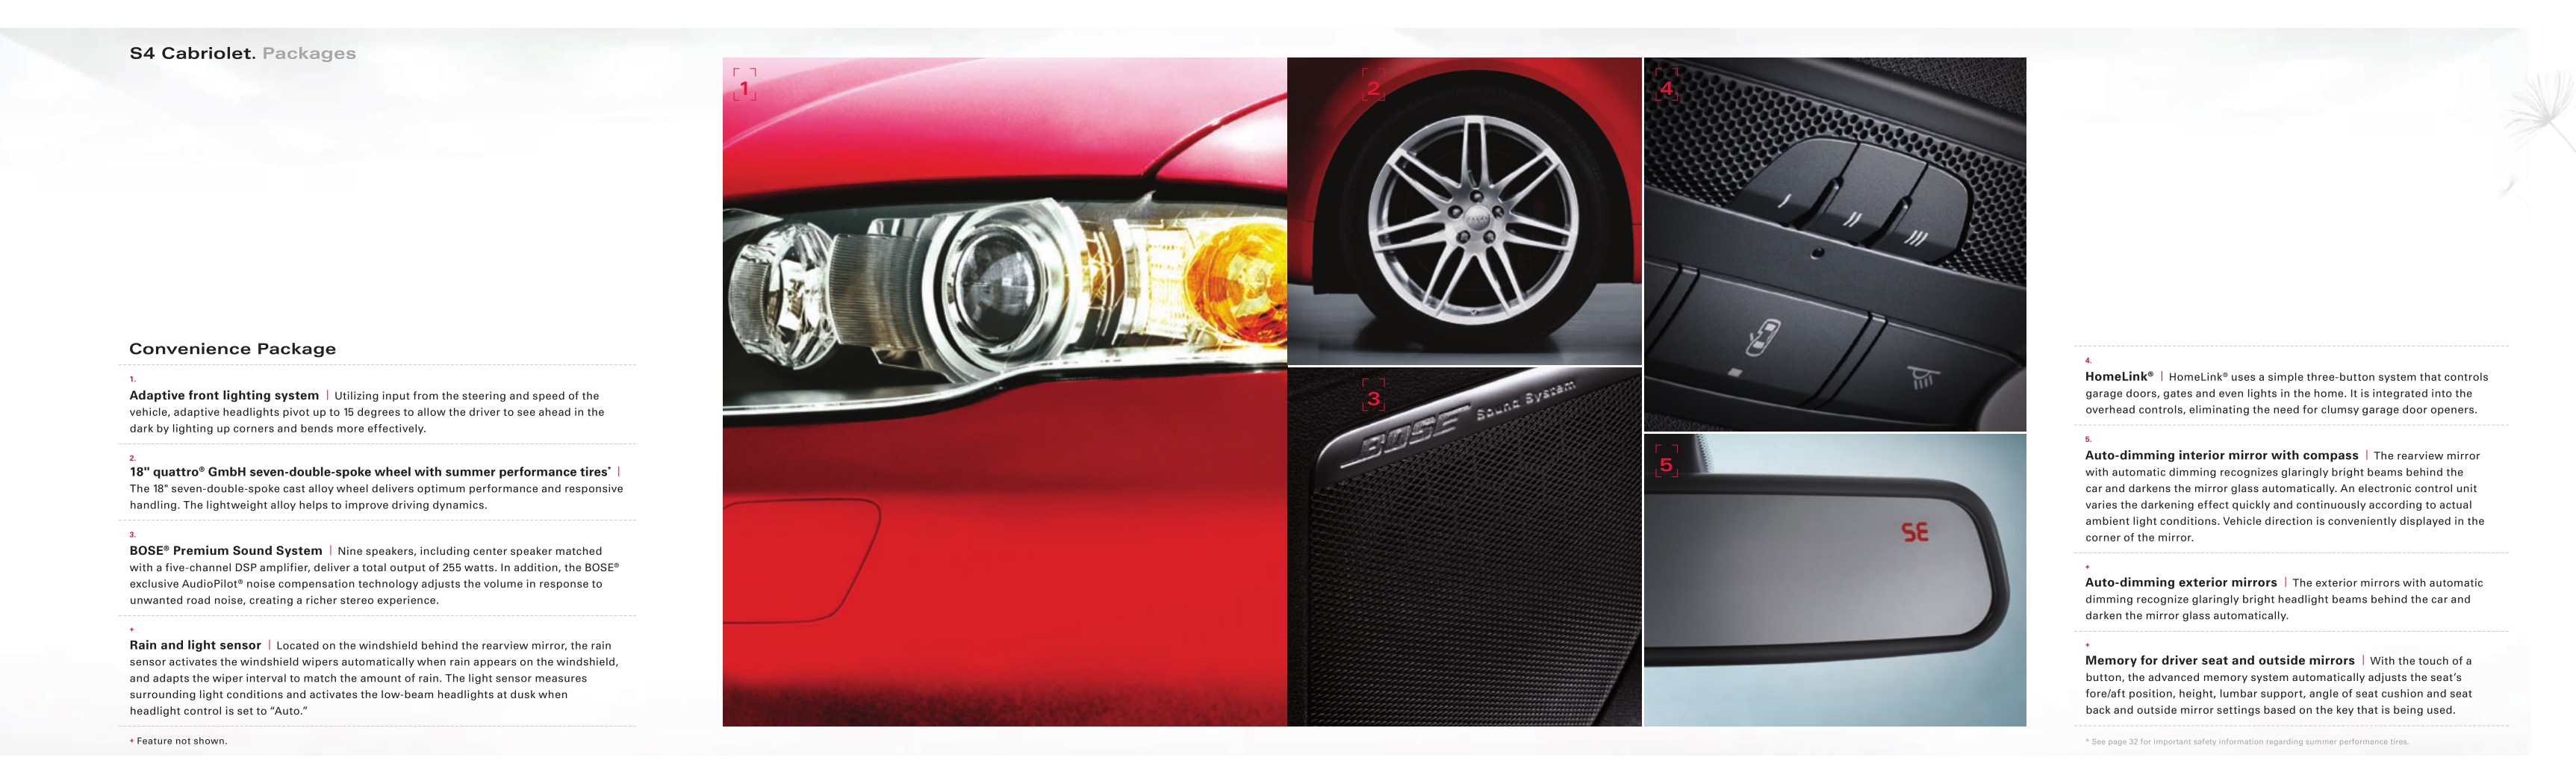 2009 Audi A4 Convertible Brochure Page 6